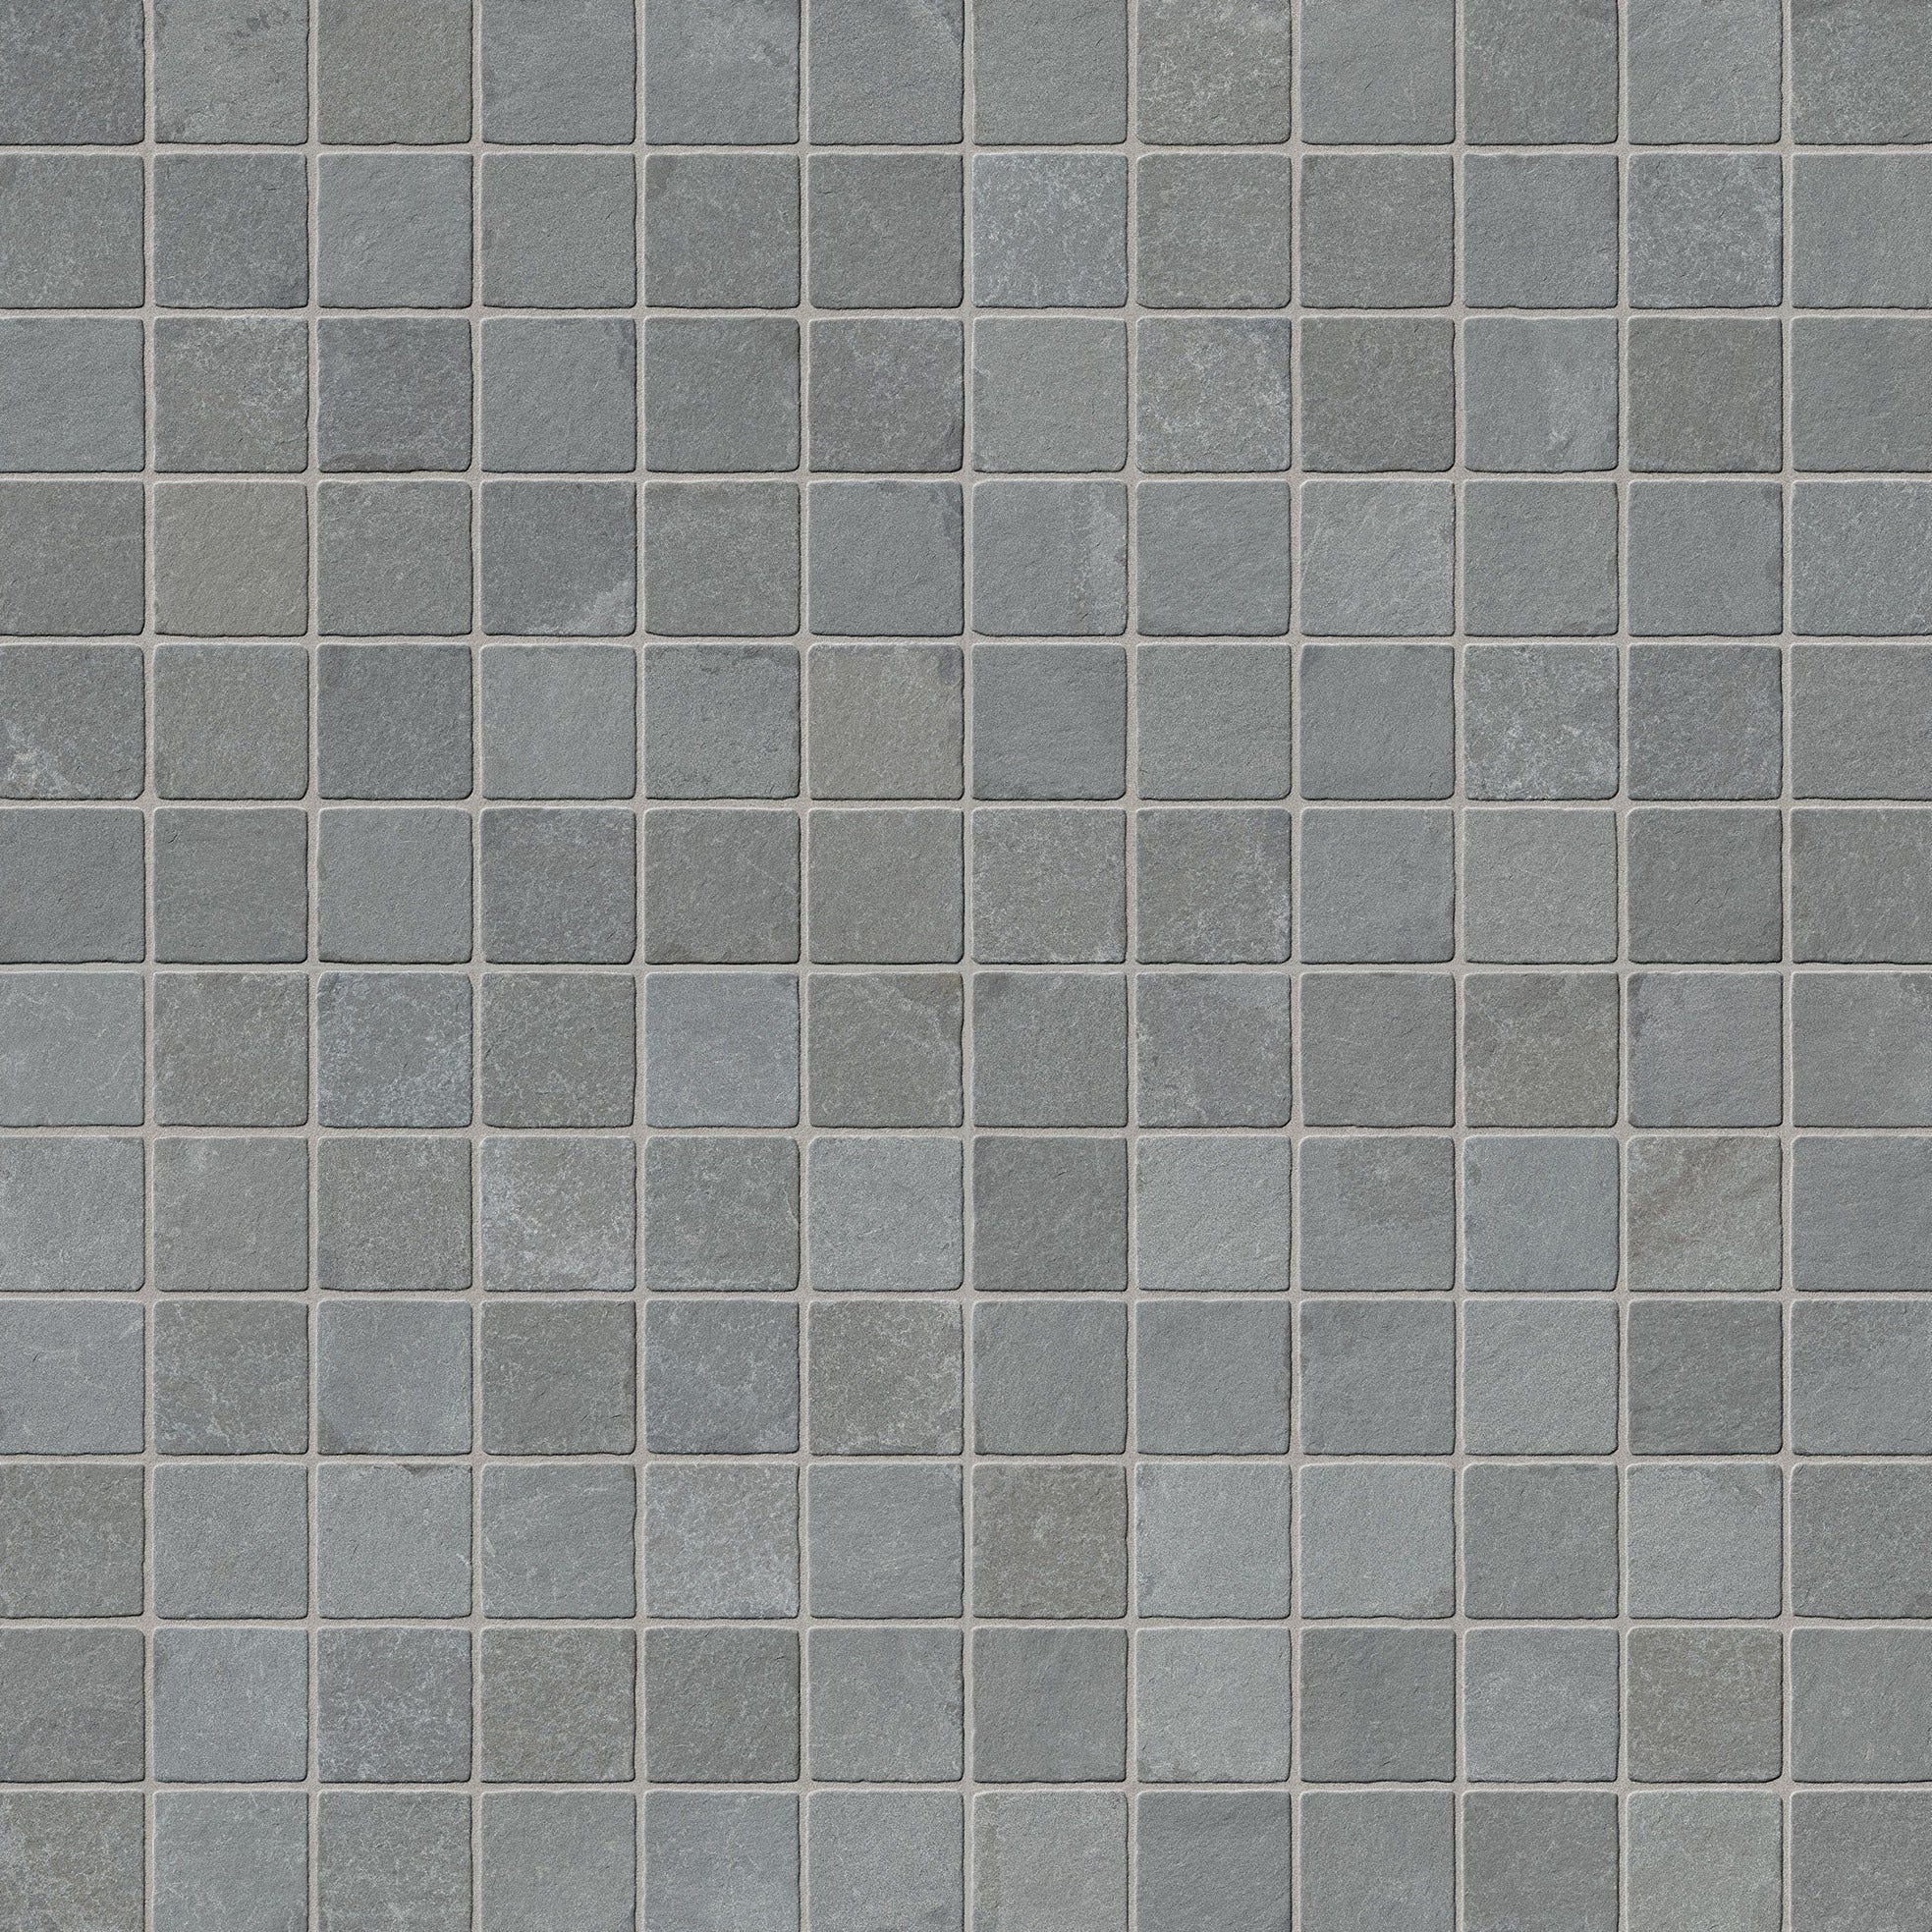 surface group international frontier 20 porcelain paving tile bluestone multicolor tumbled cobblestone cube 24x24 for outdoor application manufactured by landmark